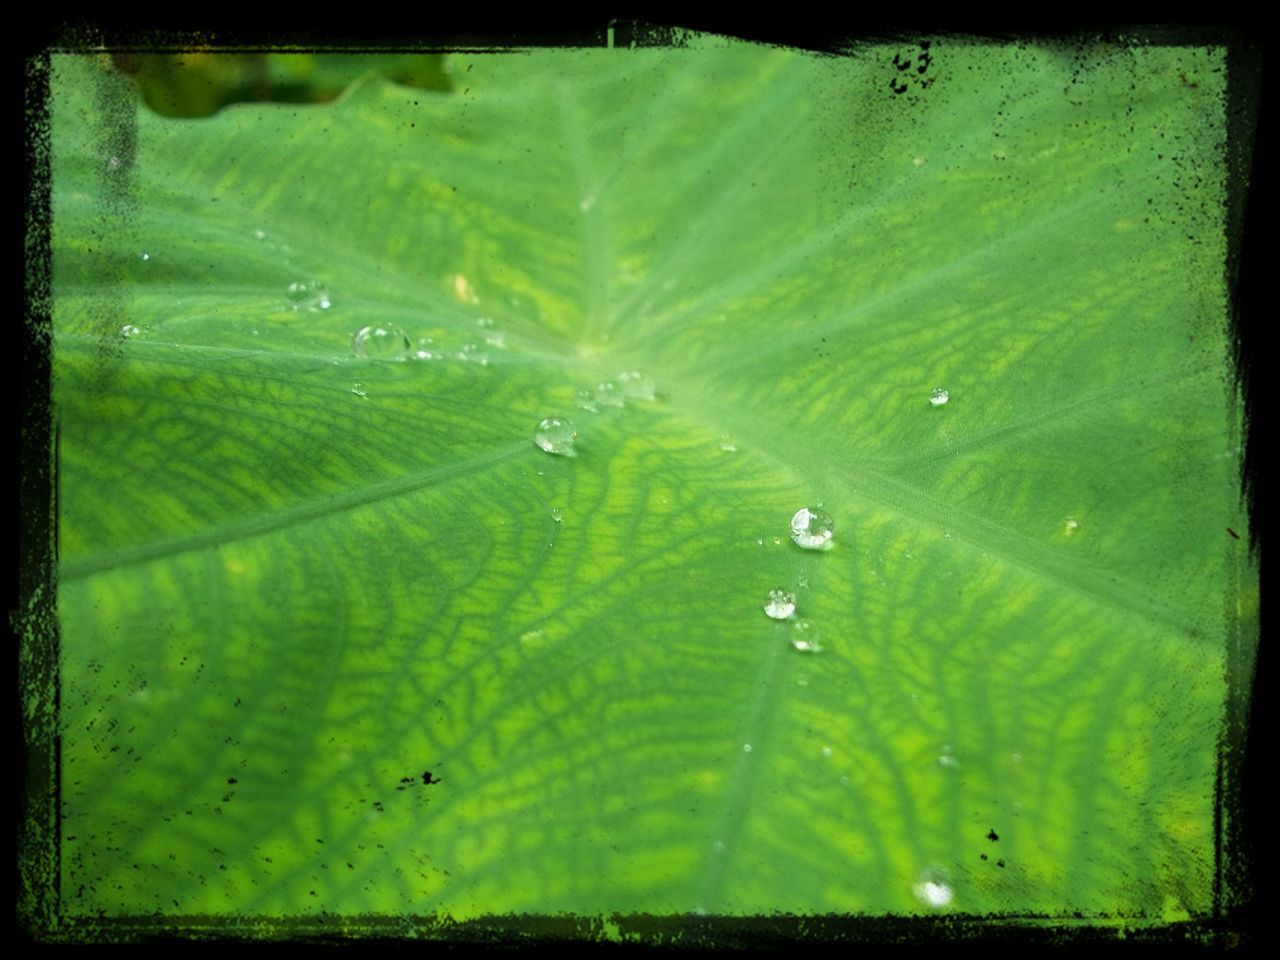 transfer print, drop, water, auto post production filter, green color, wet, nature, leaf, close-up, beauty in nature, freshness, growth, dew, fragility, full frame, natural pattern, raindrop, backgrounds, rain, day